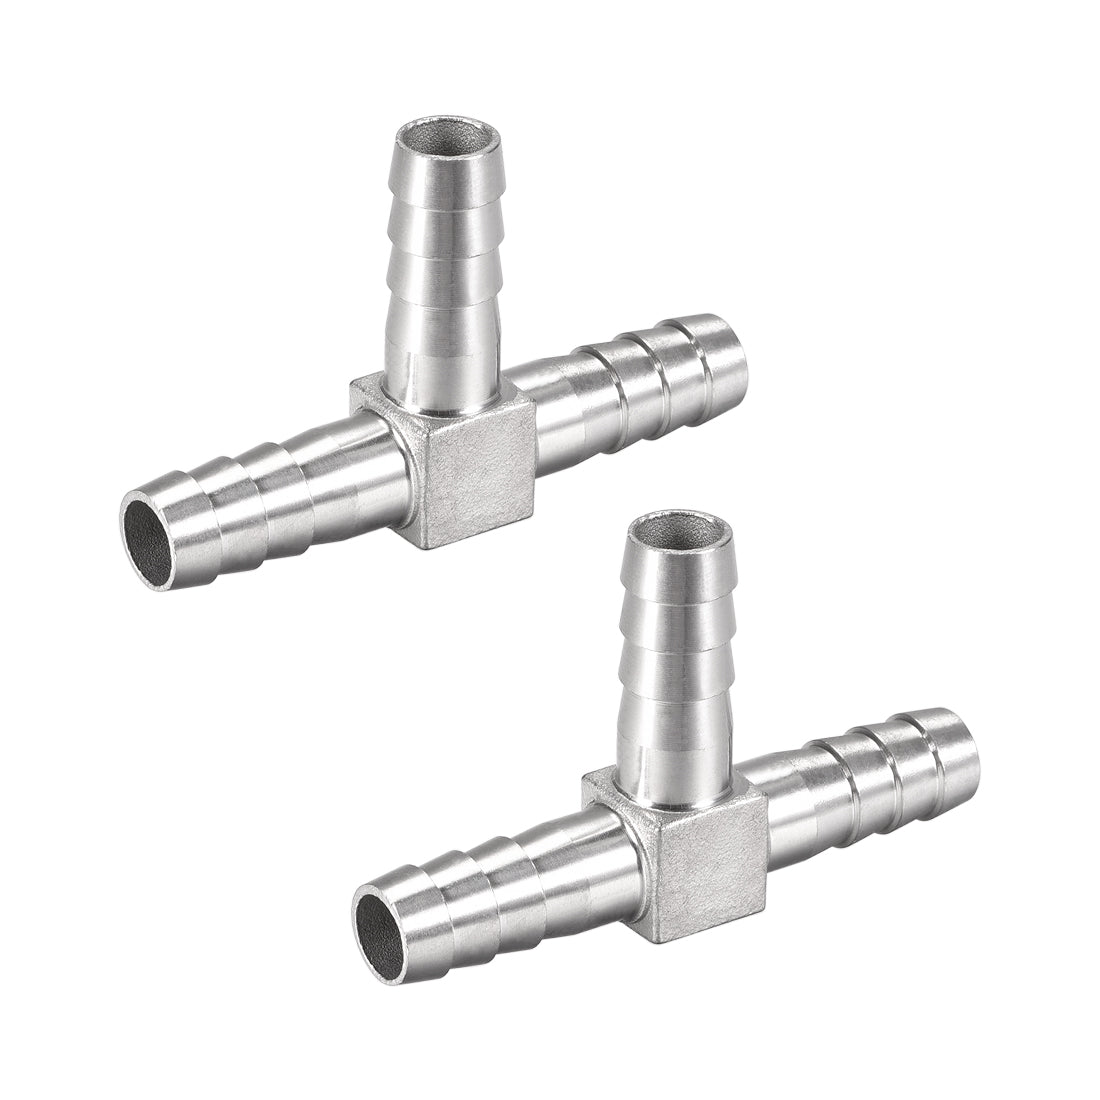 uxcell Uxcell 1/2-Inch (13mm) Hose ID Barb Fitting Stainless Steel 3 Way T-Shaped Union Home Brew Fitting 2pcs